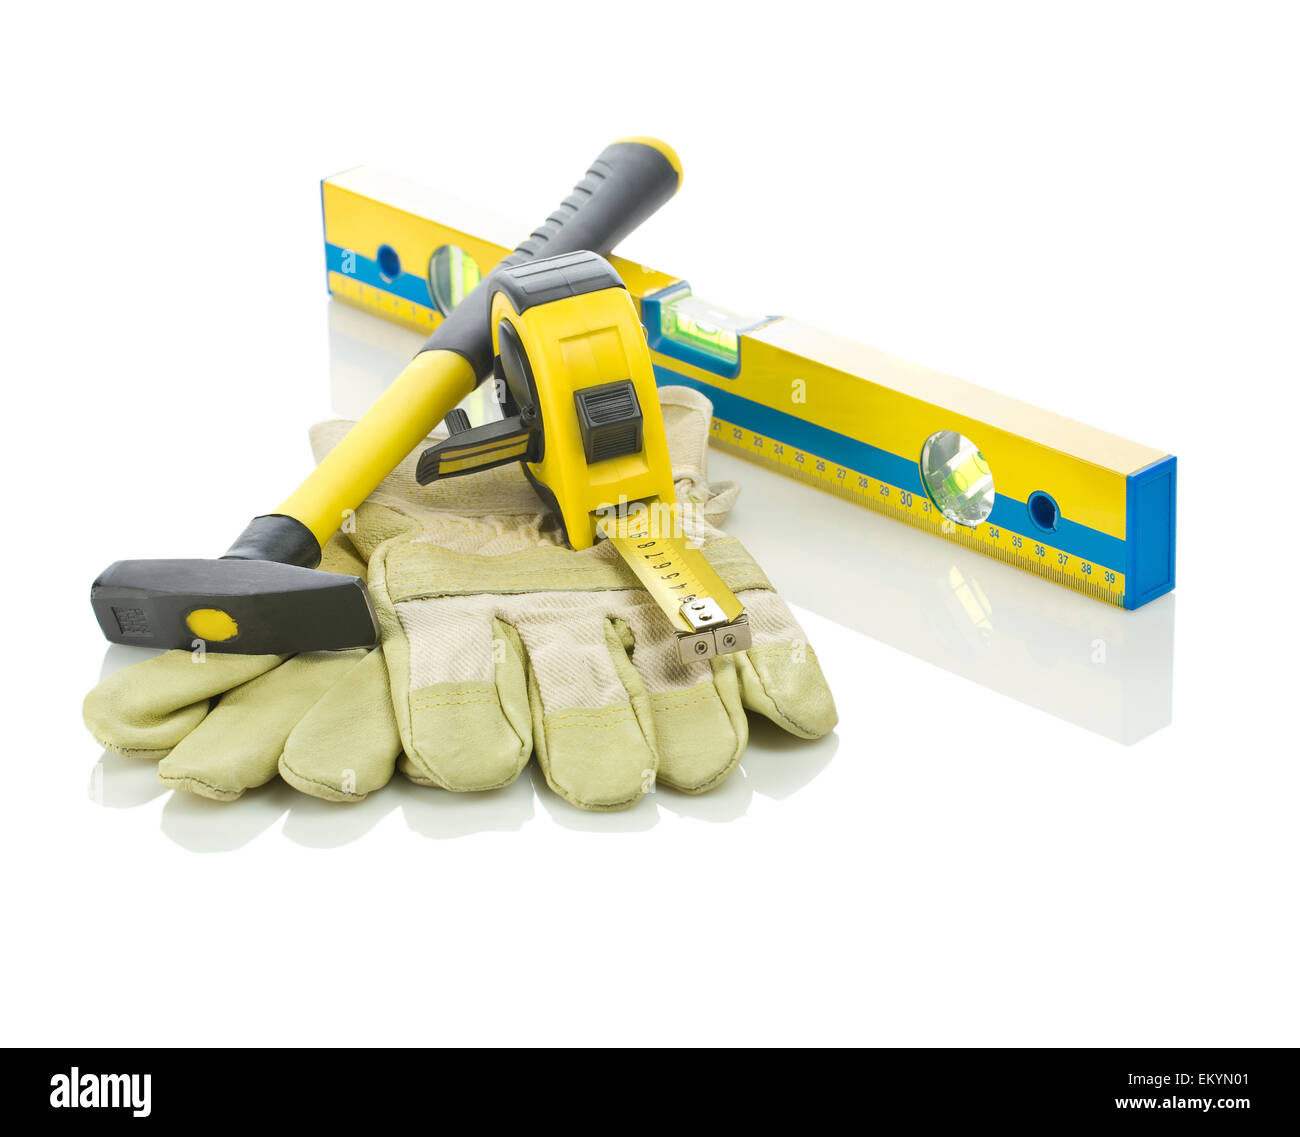 level, tapeline, hammer and gloves Stock Photo